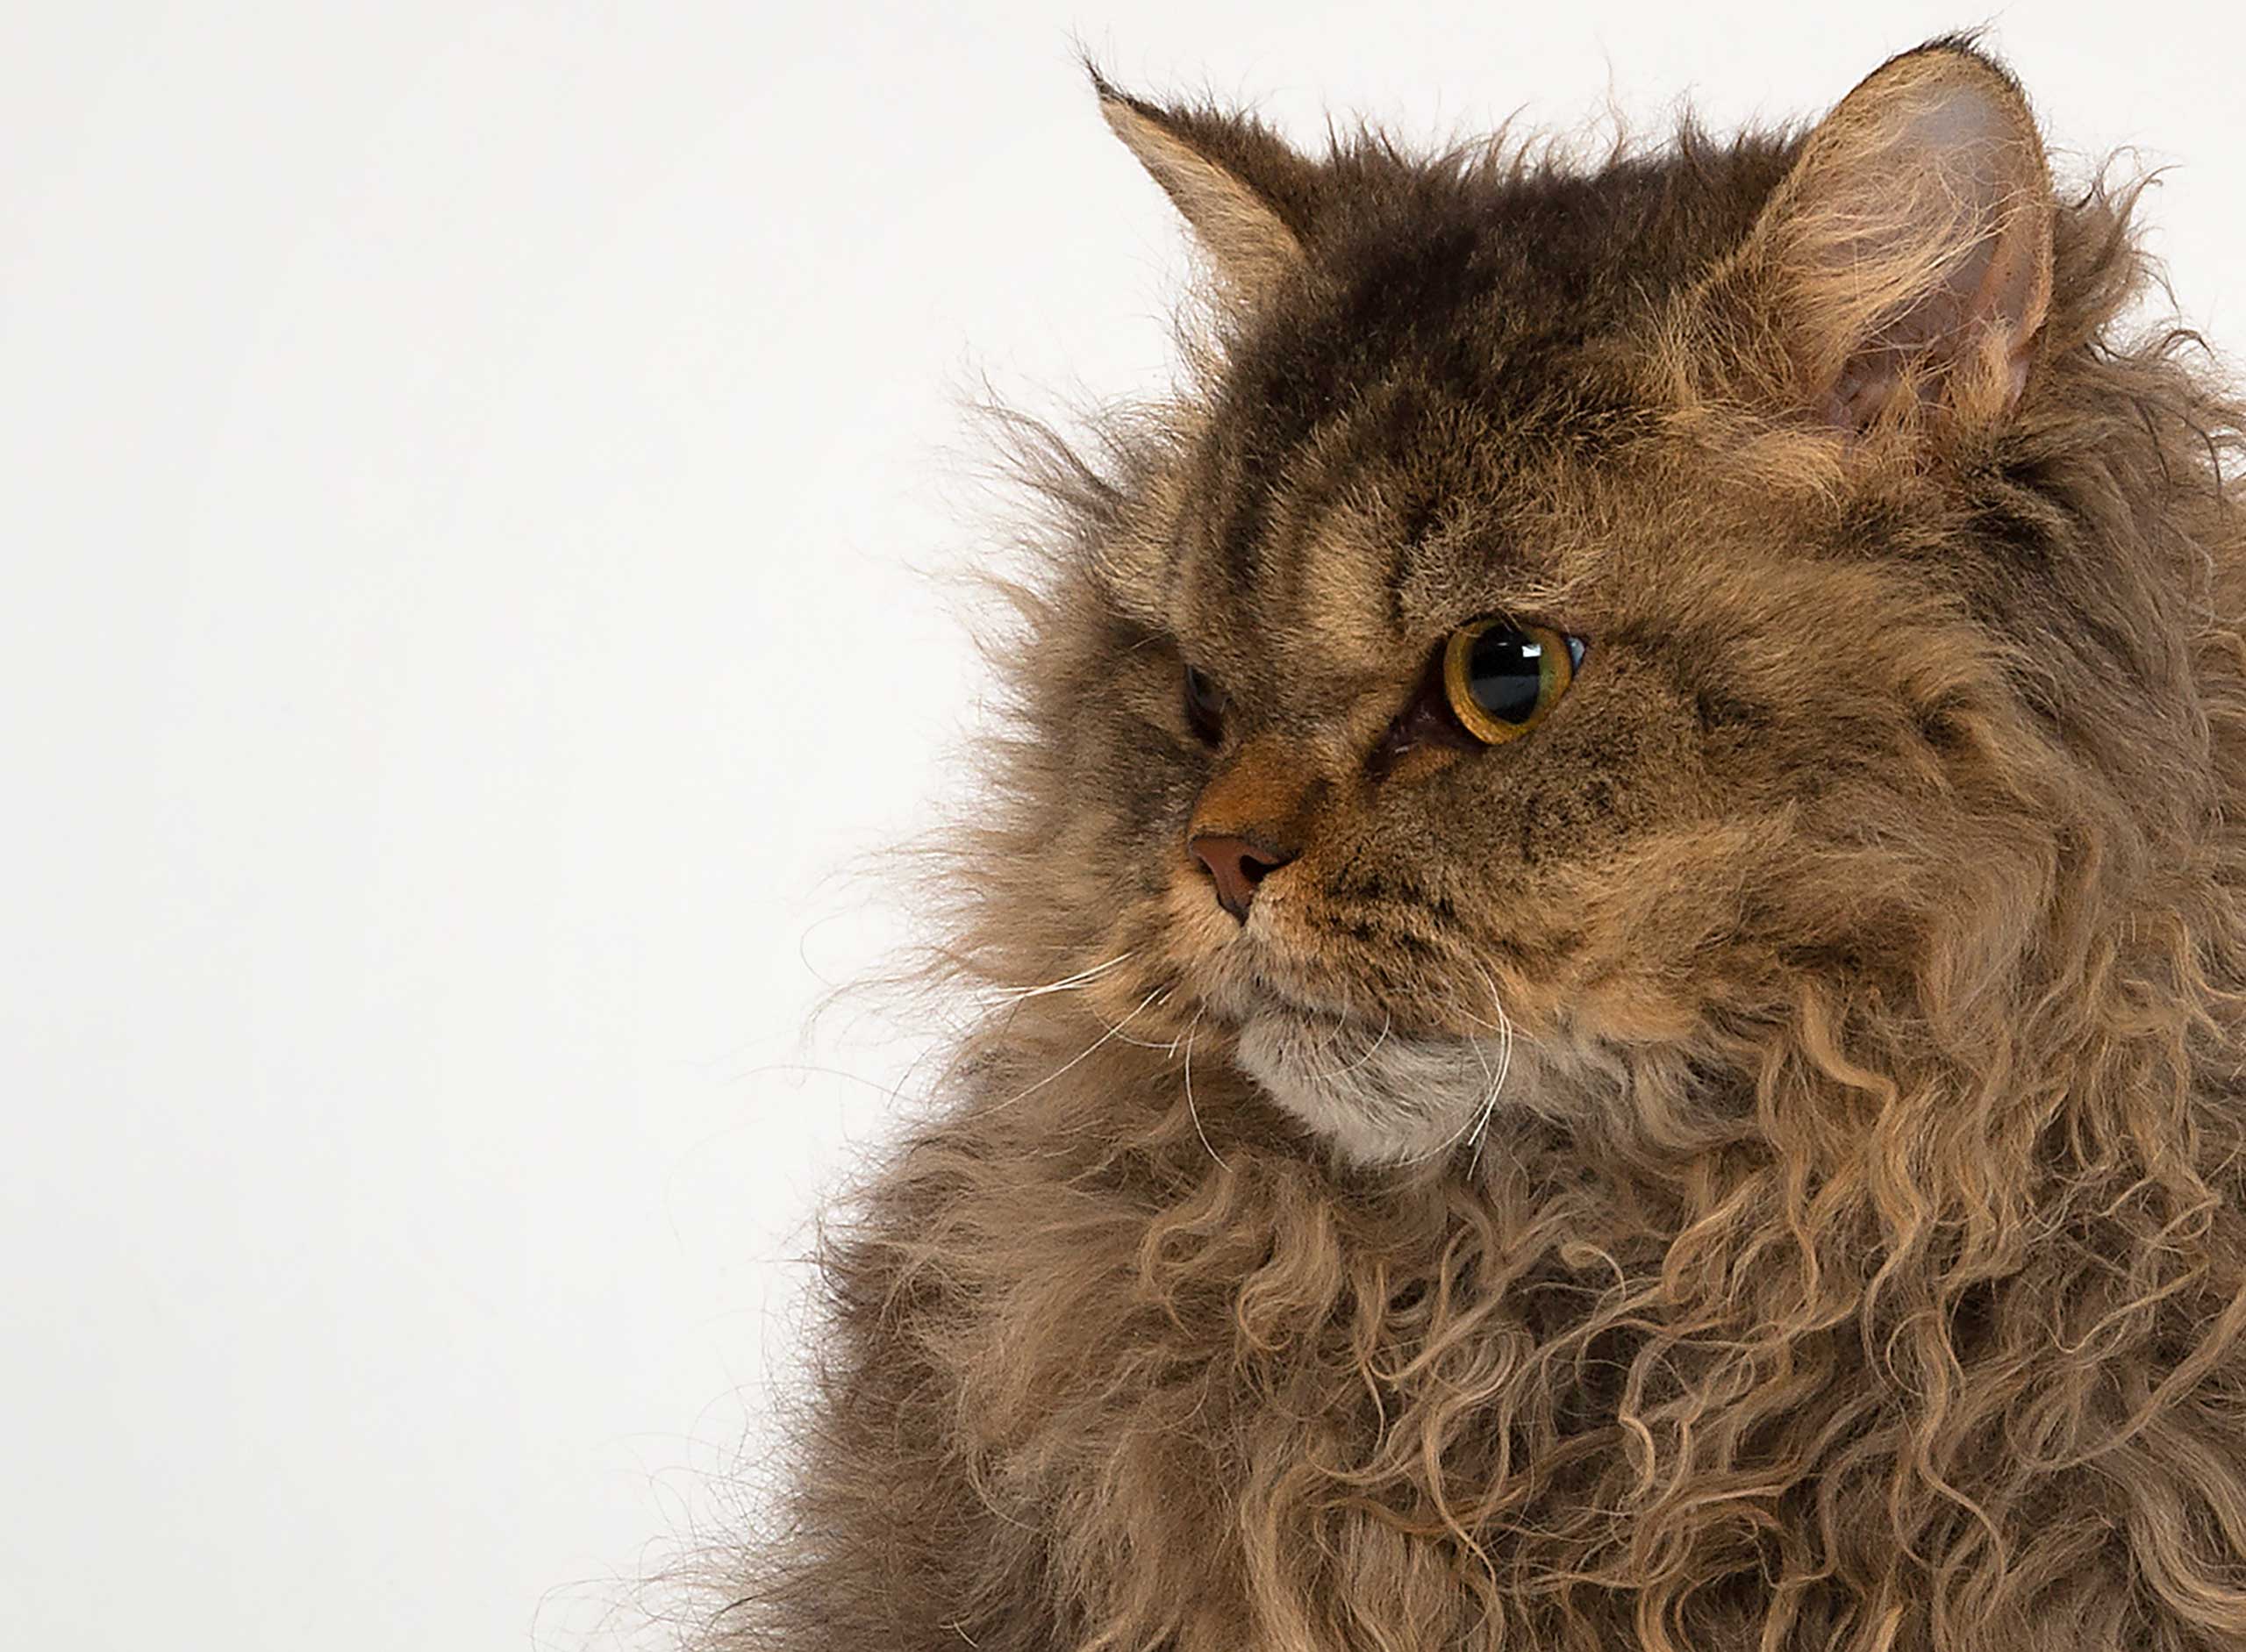 Cat with curly coat